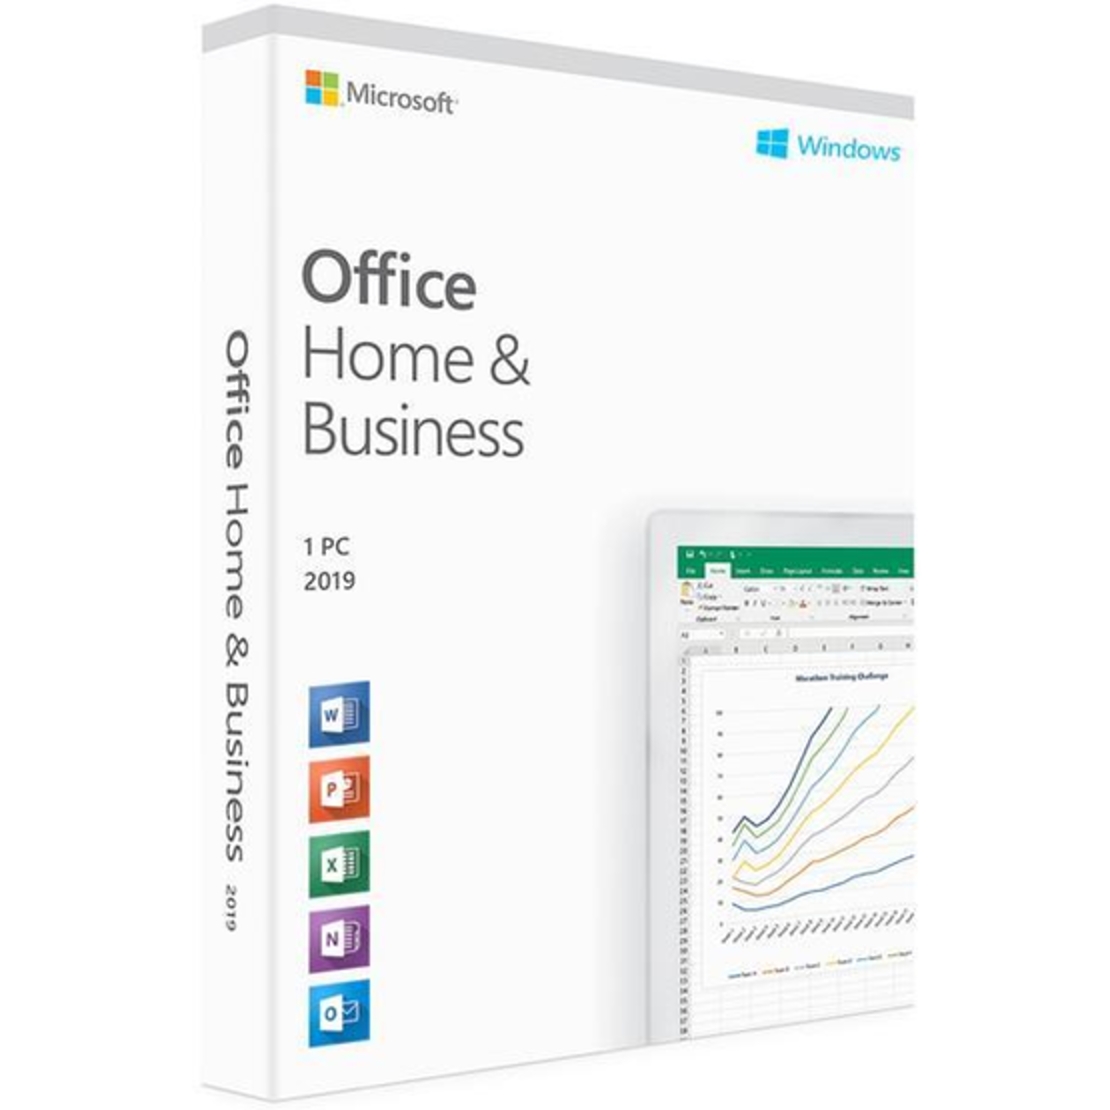 Microsoft Office Home & Business 2019 | אופיס 2019 לעסק